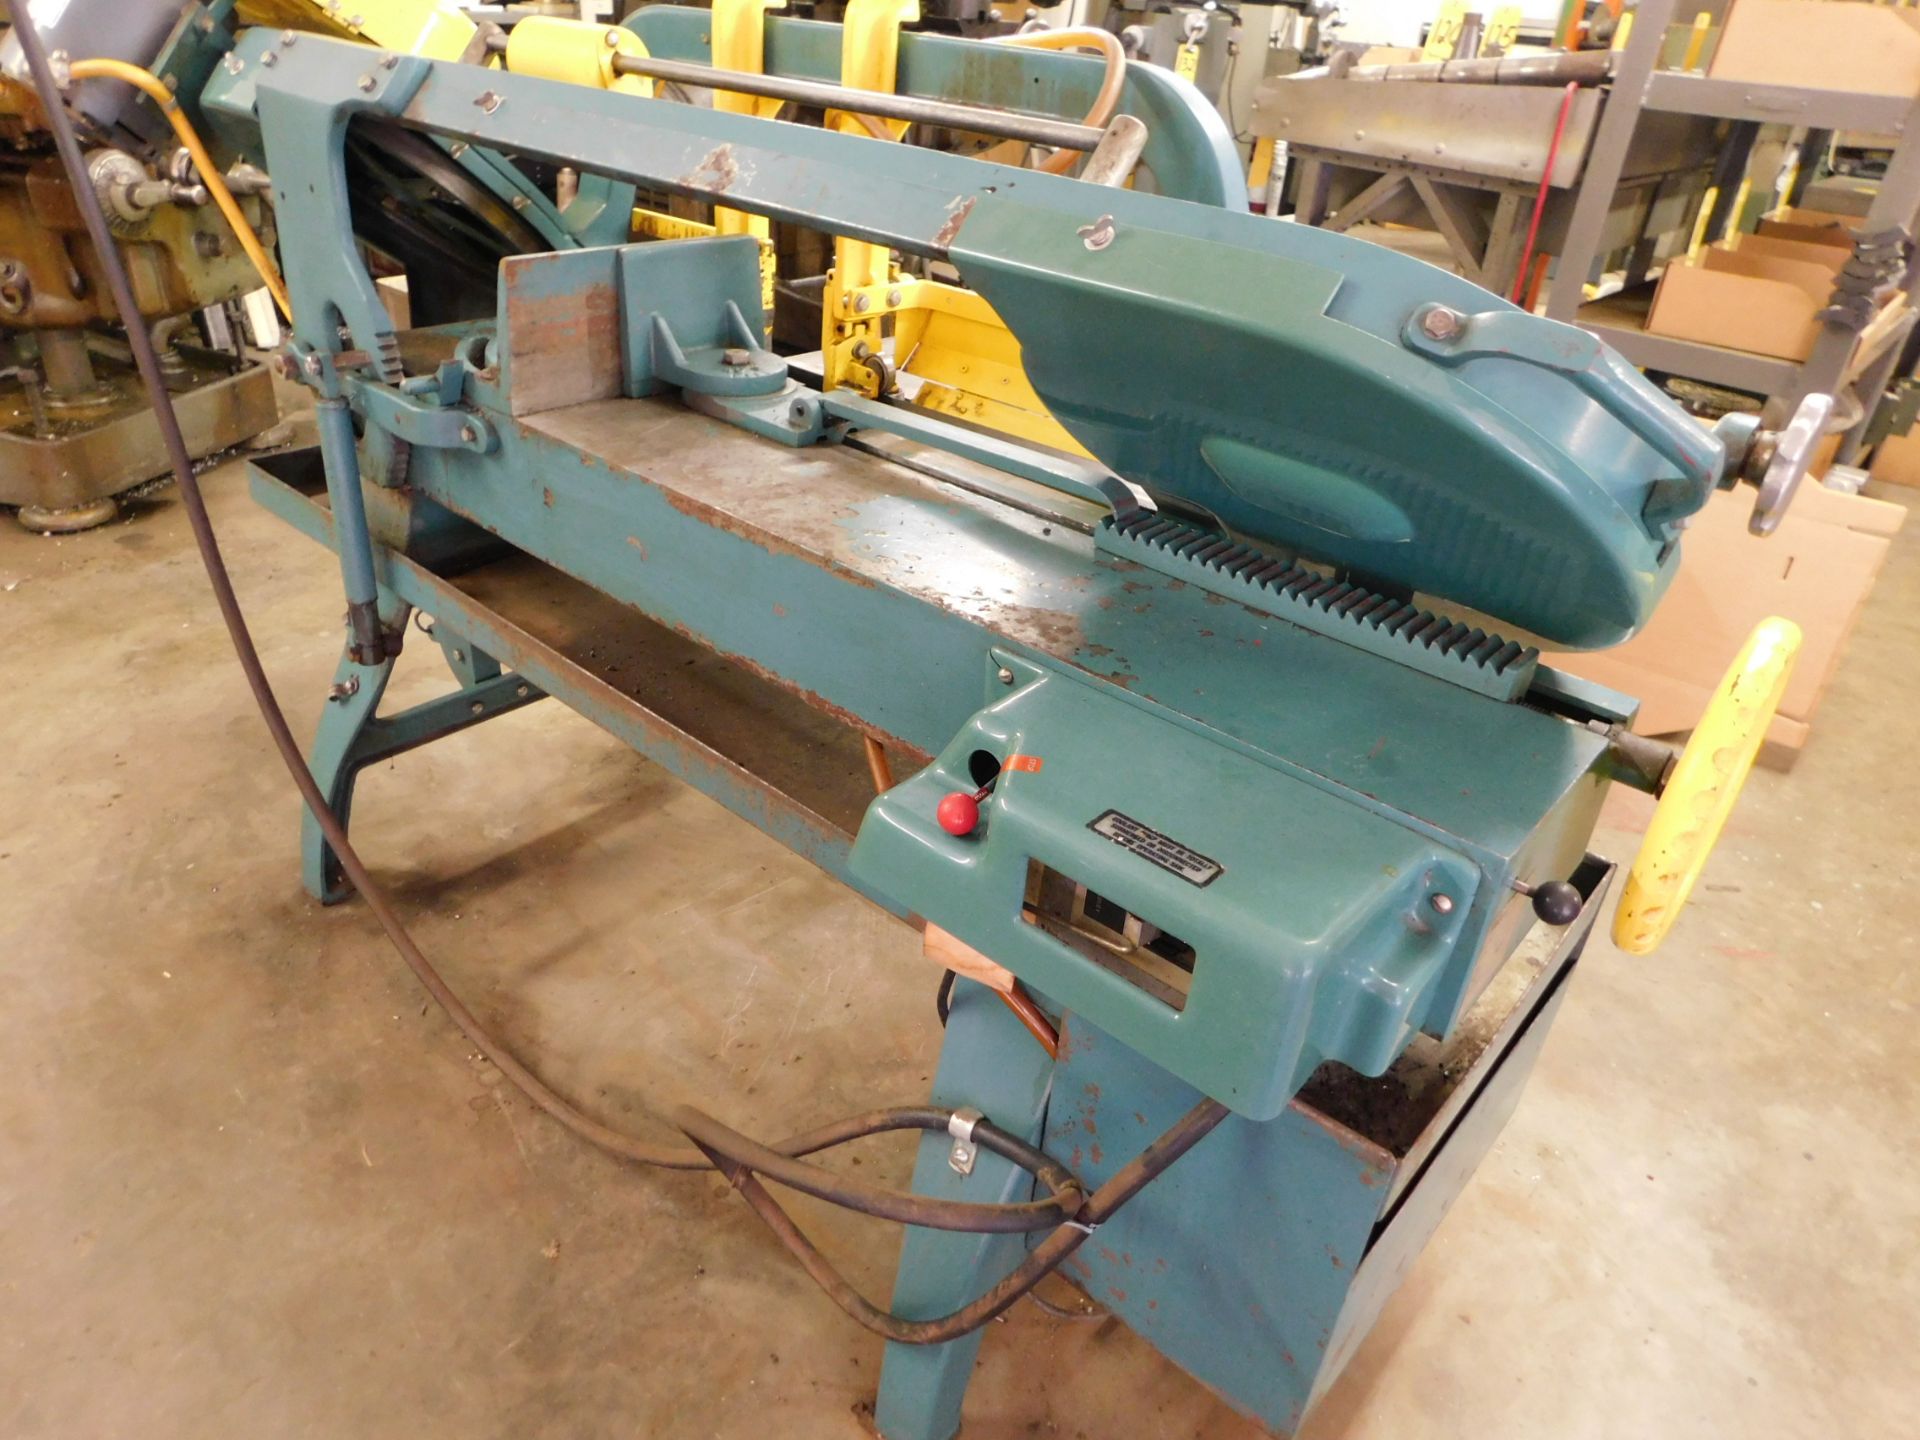 Wells Model 850 Horizontal Band Saw, 9 In. X 16 In., s/n 3105, 1 Inch Blade, Coolant - Image 5 of 8